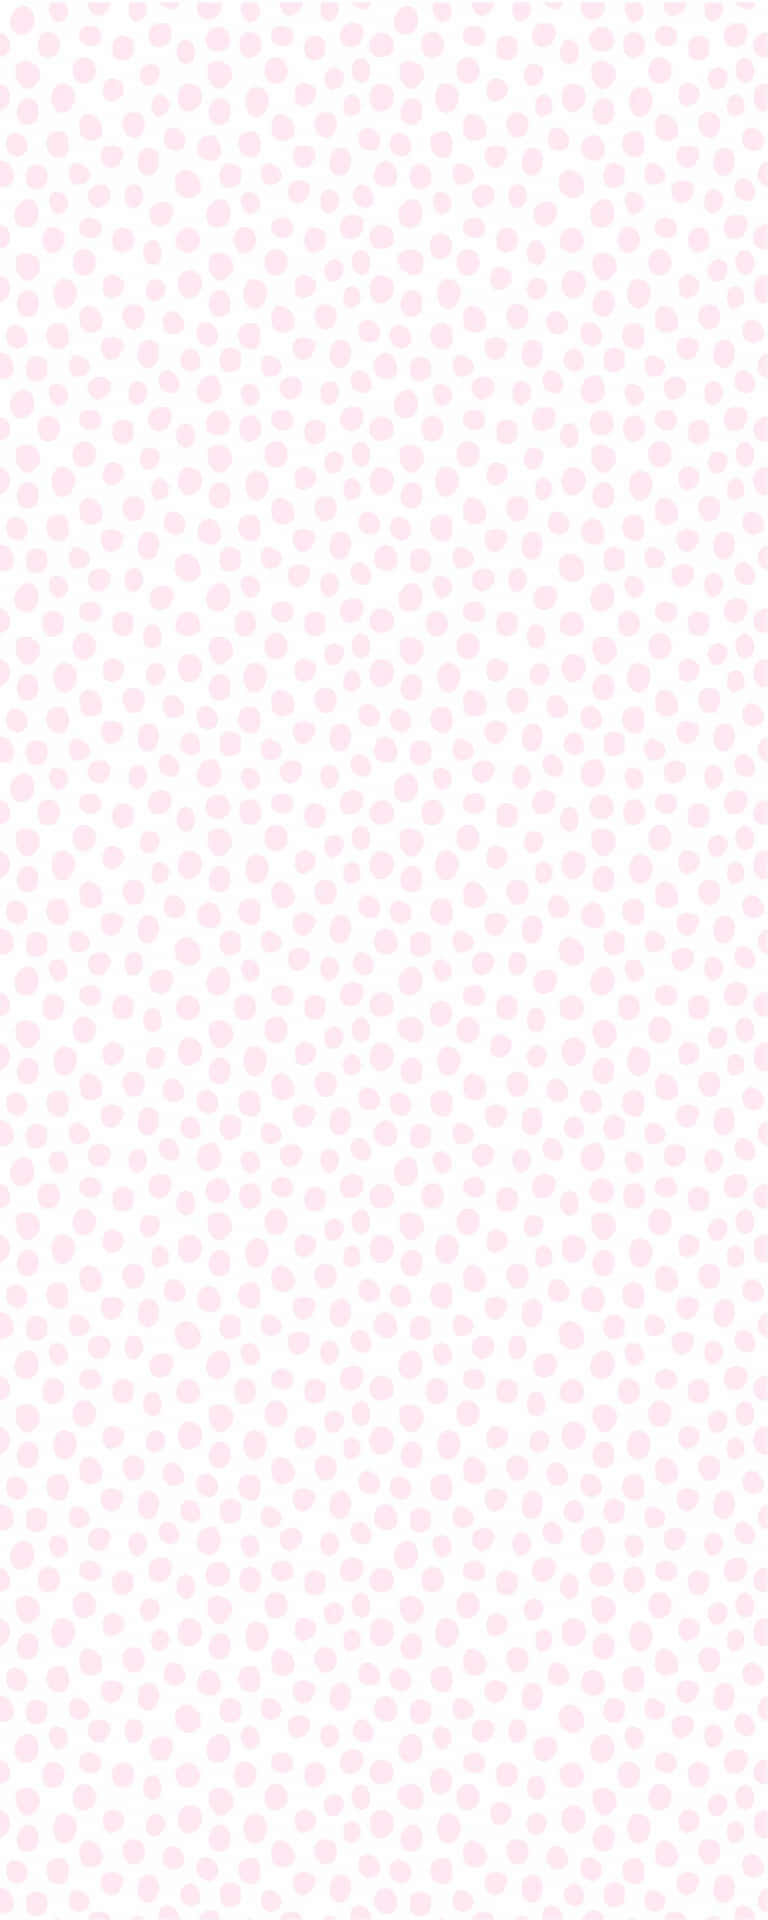 Brighten up your day with this cheerful pink and white polka dot pattern! Wallpaper